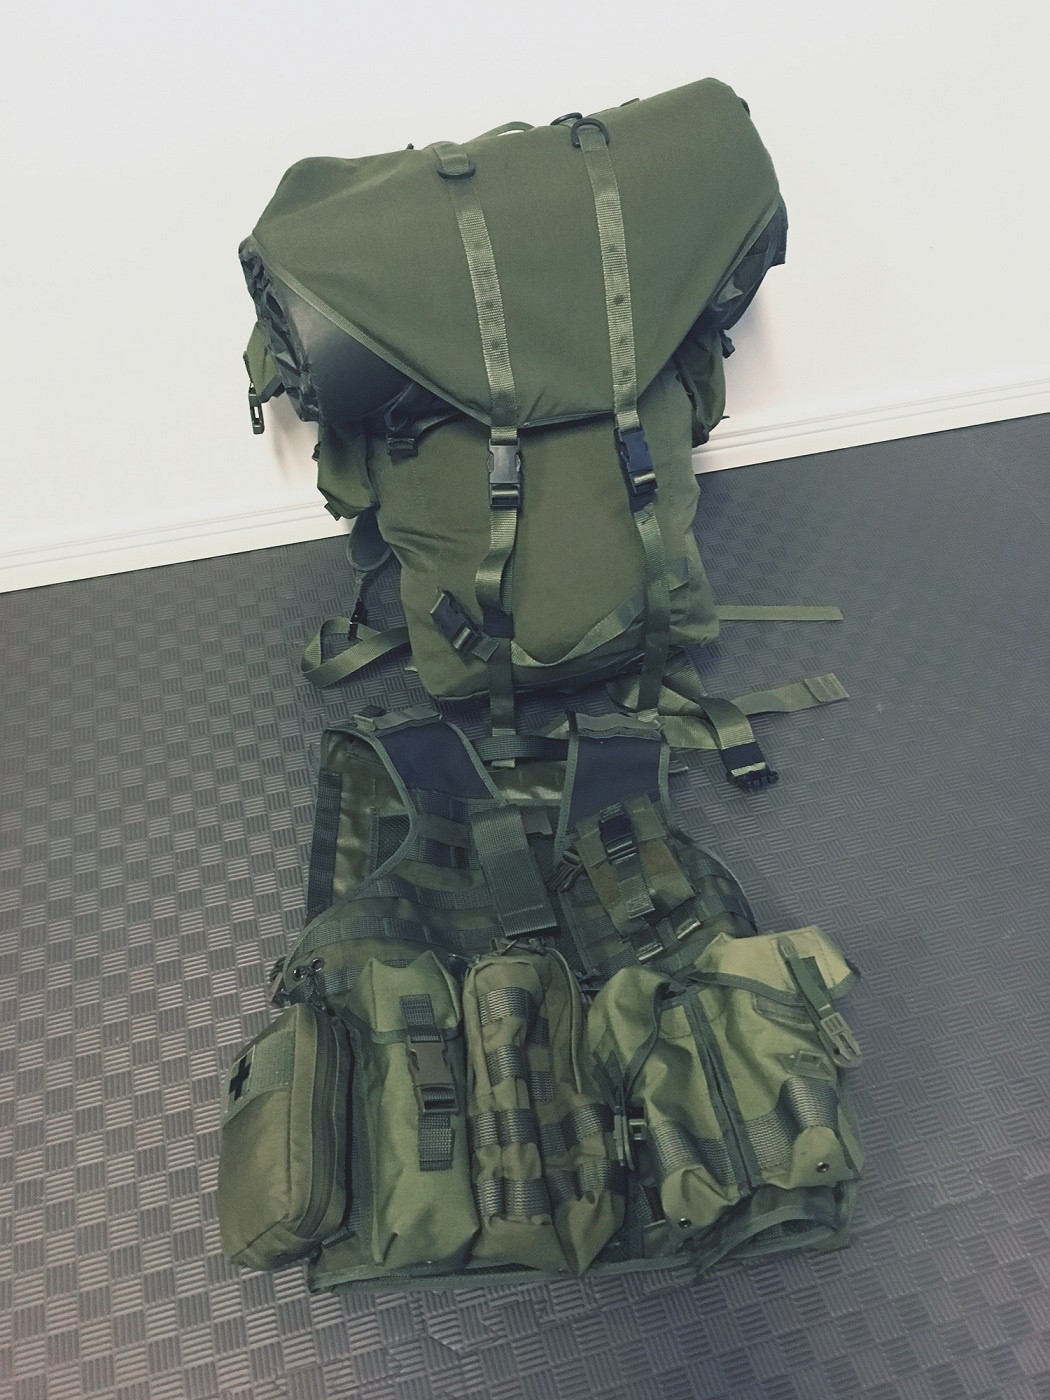 An army style green backpack and combat vest with pouches.